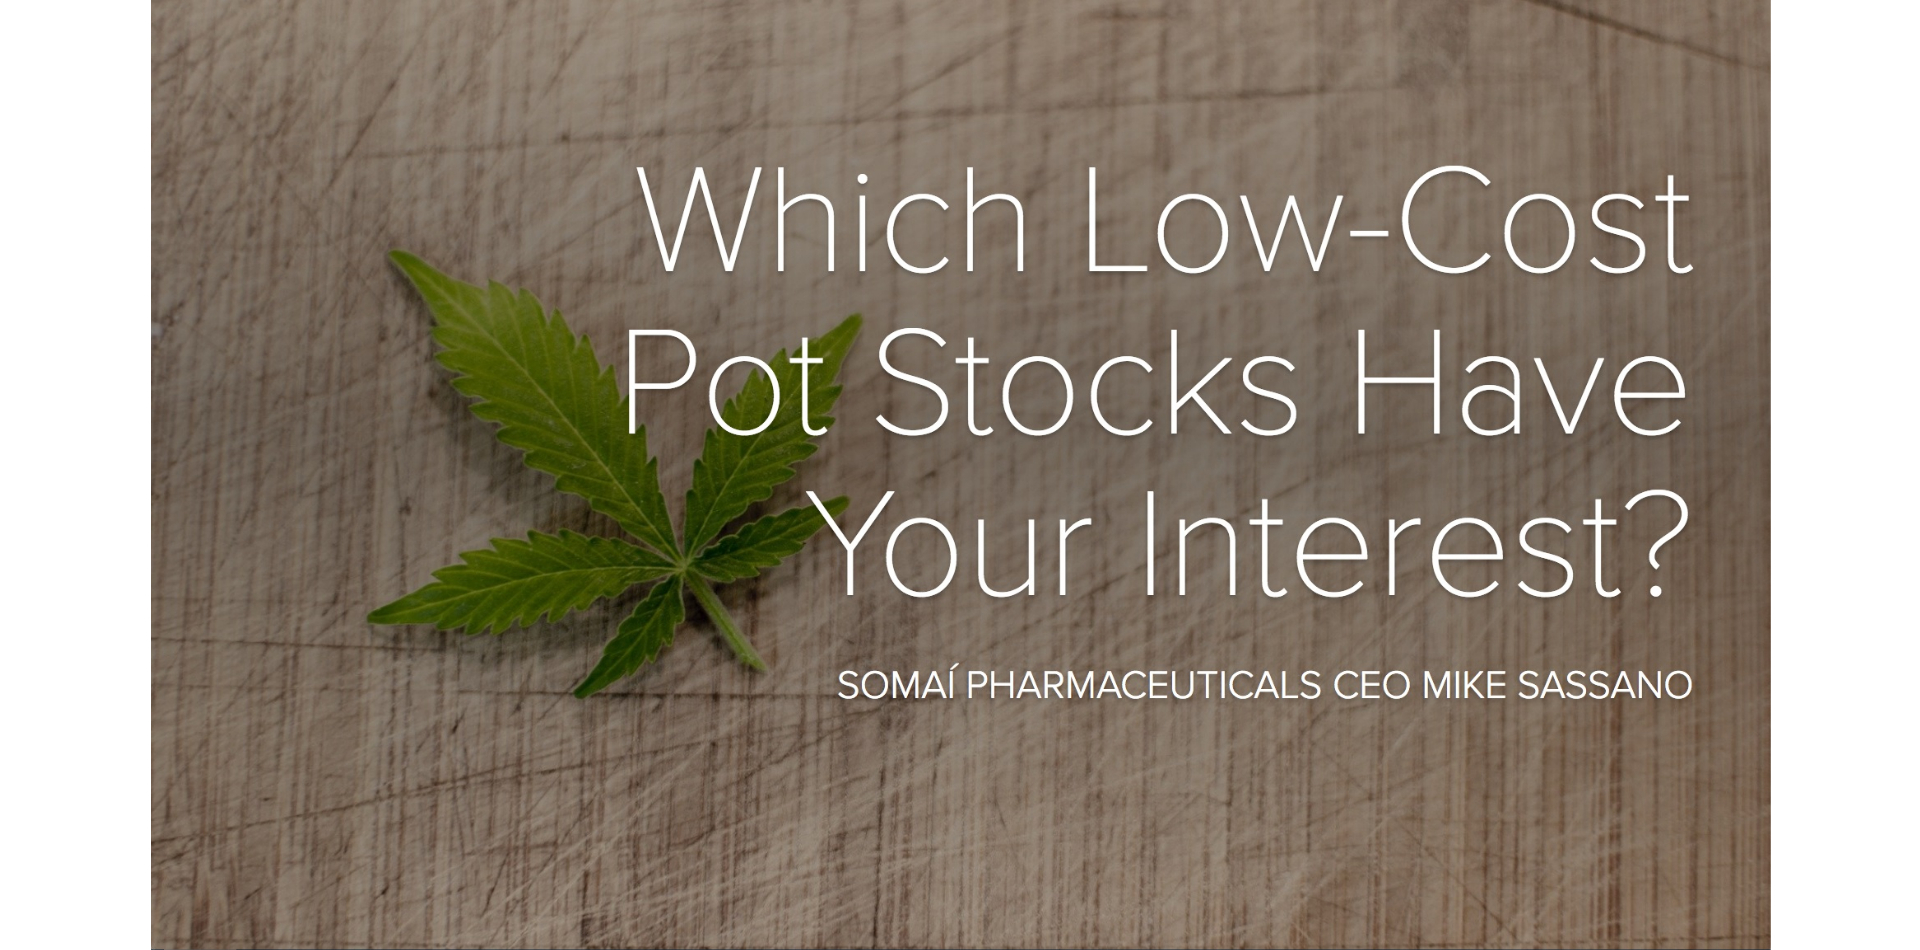 Low-Cost Pot Stocks To Consider, According To SOMAÍ Pharmaceuticals CEO Mike Sassano